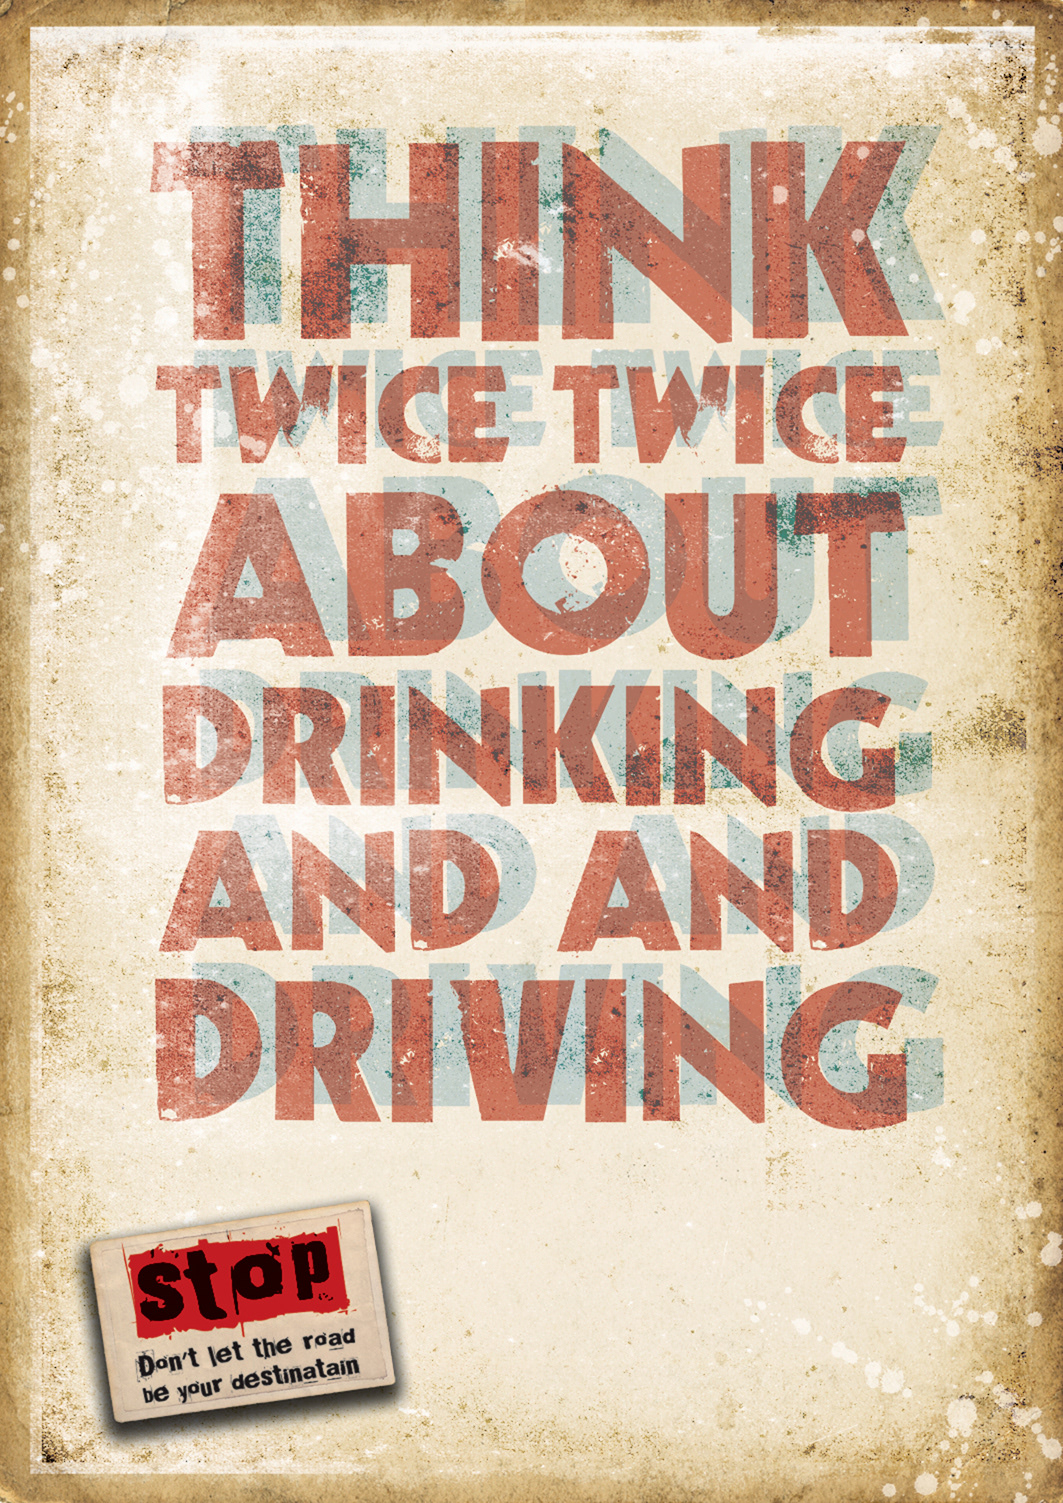 Safety Posters type Road Safety